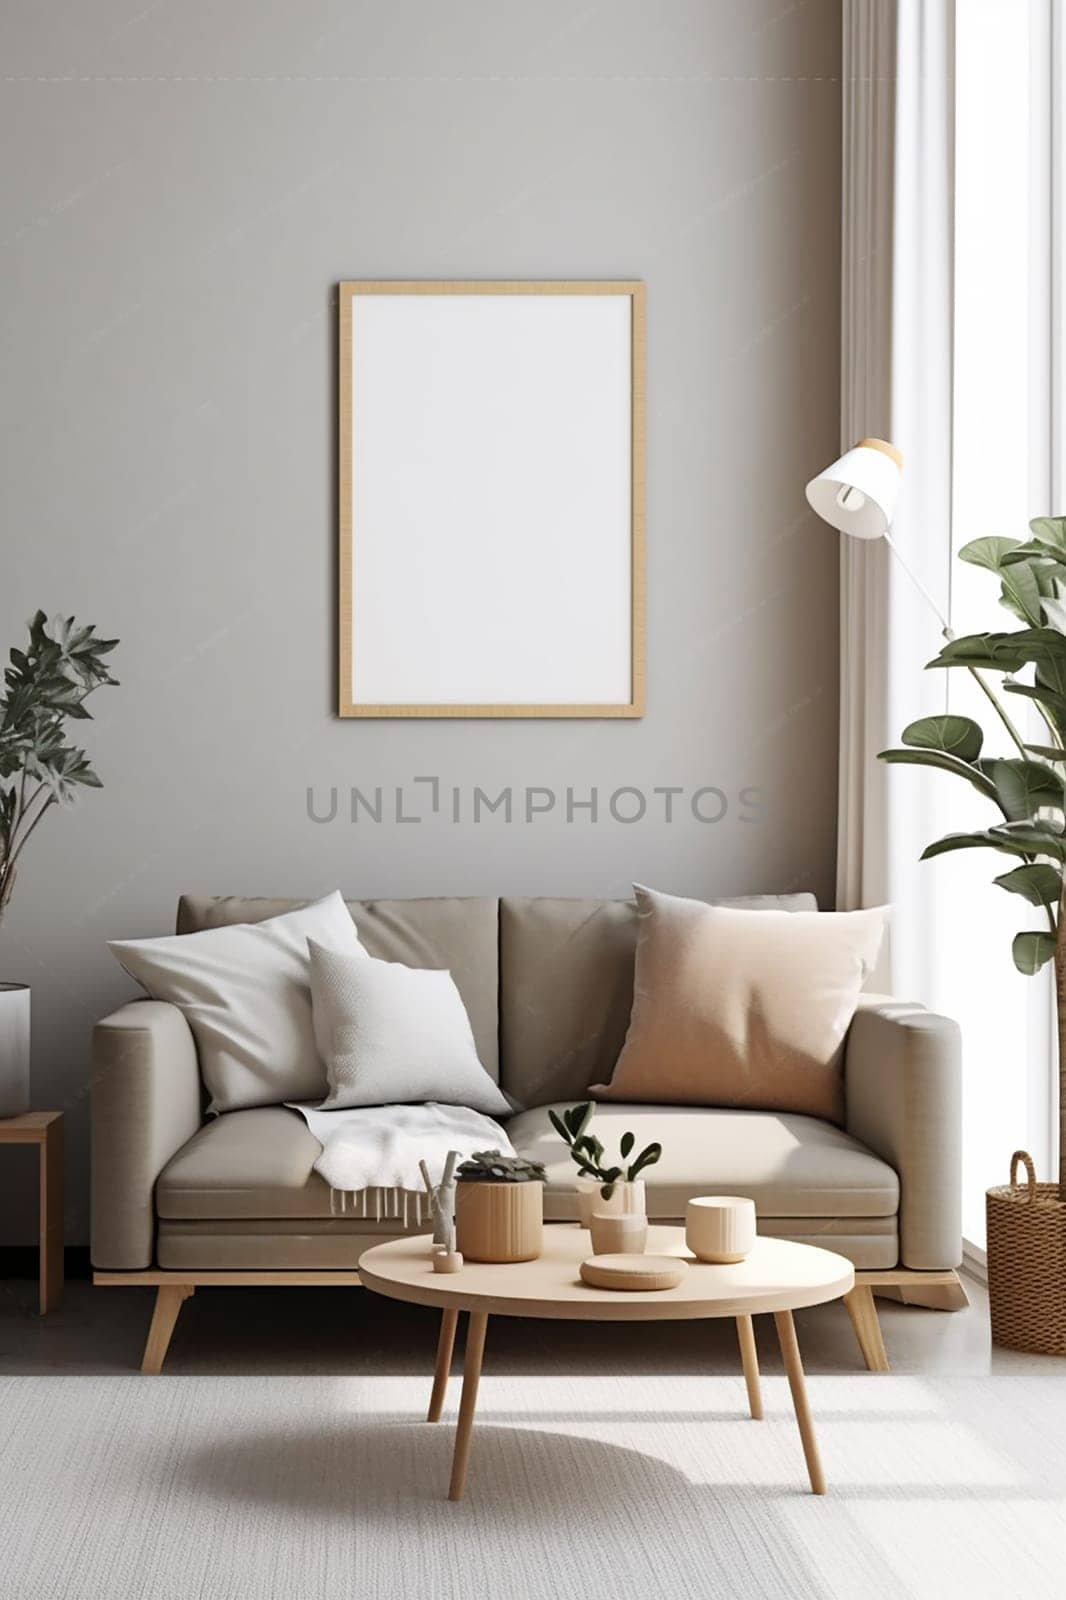 Mock up for a vertical frame, minimalist living room interior with a blank frame, gray sofa, indoor plant, and decorative vase on a side table.